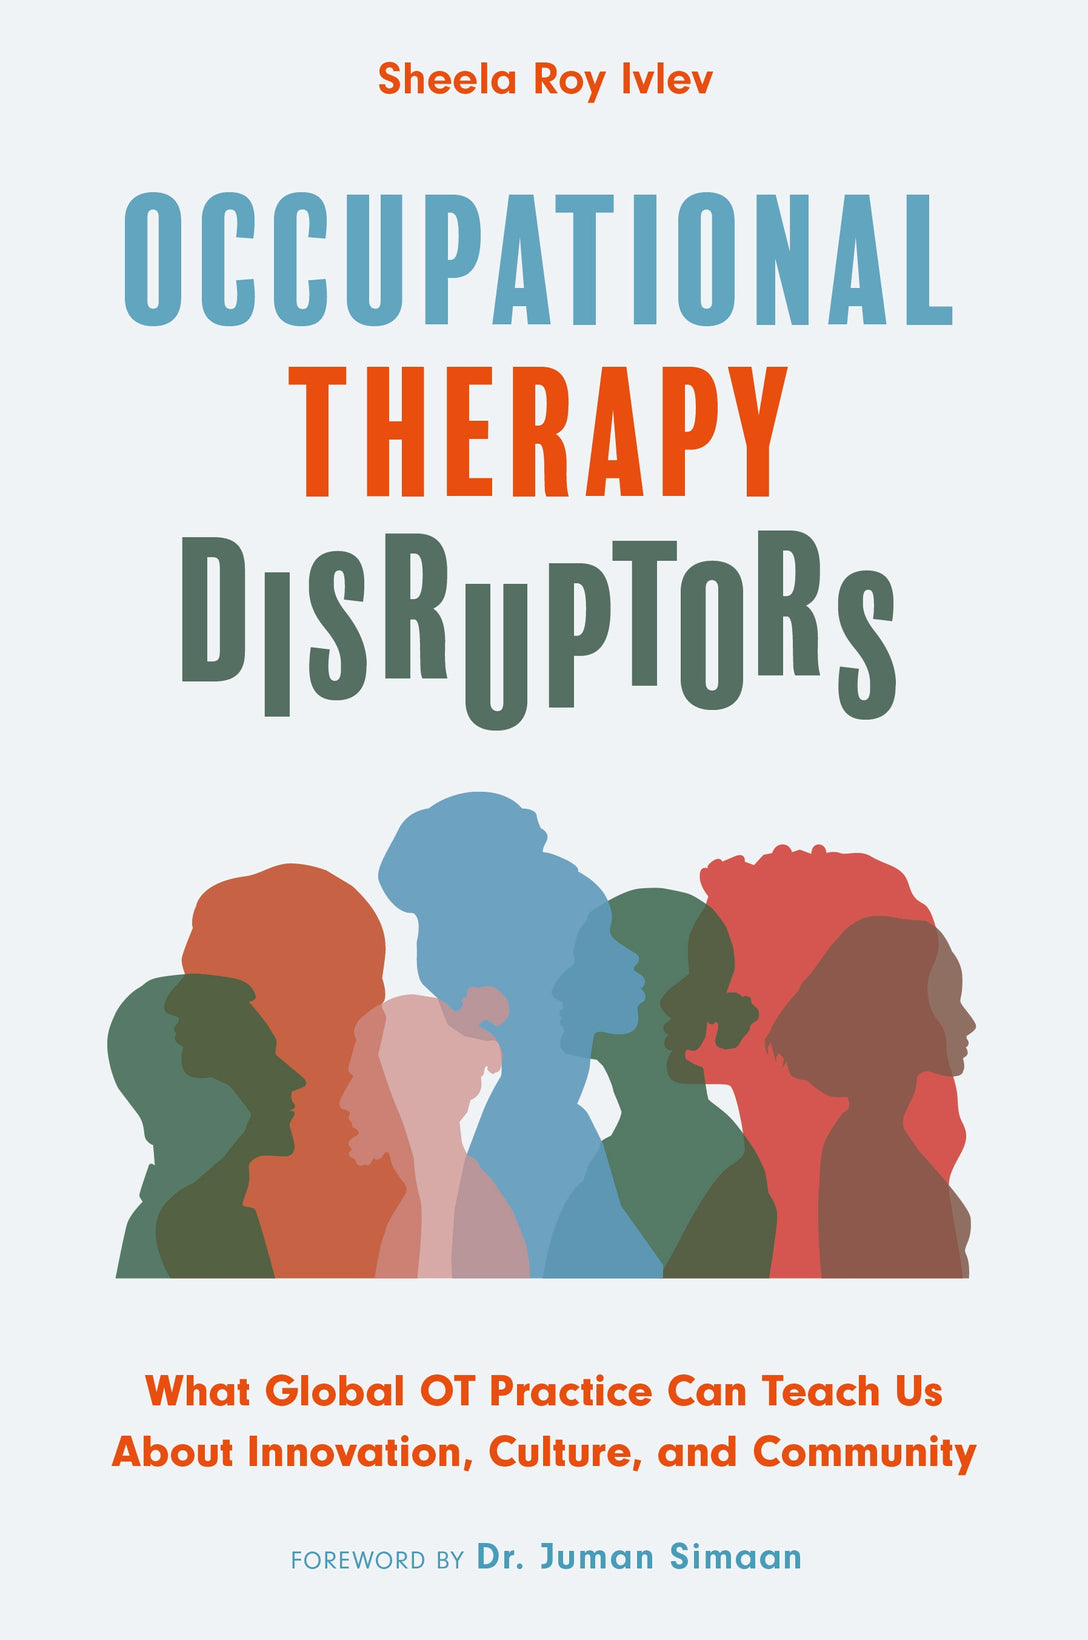 Occupational Therapy Disruptors by Sheela Roy Ivlev